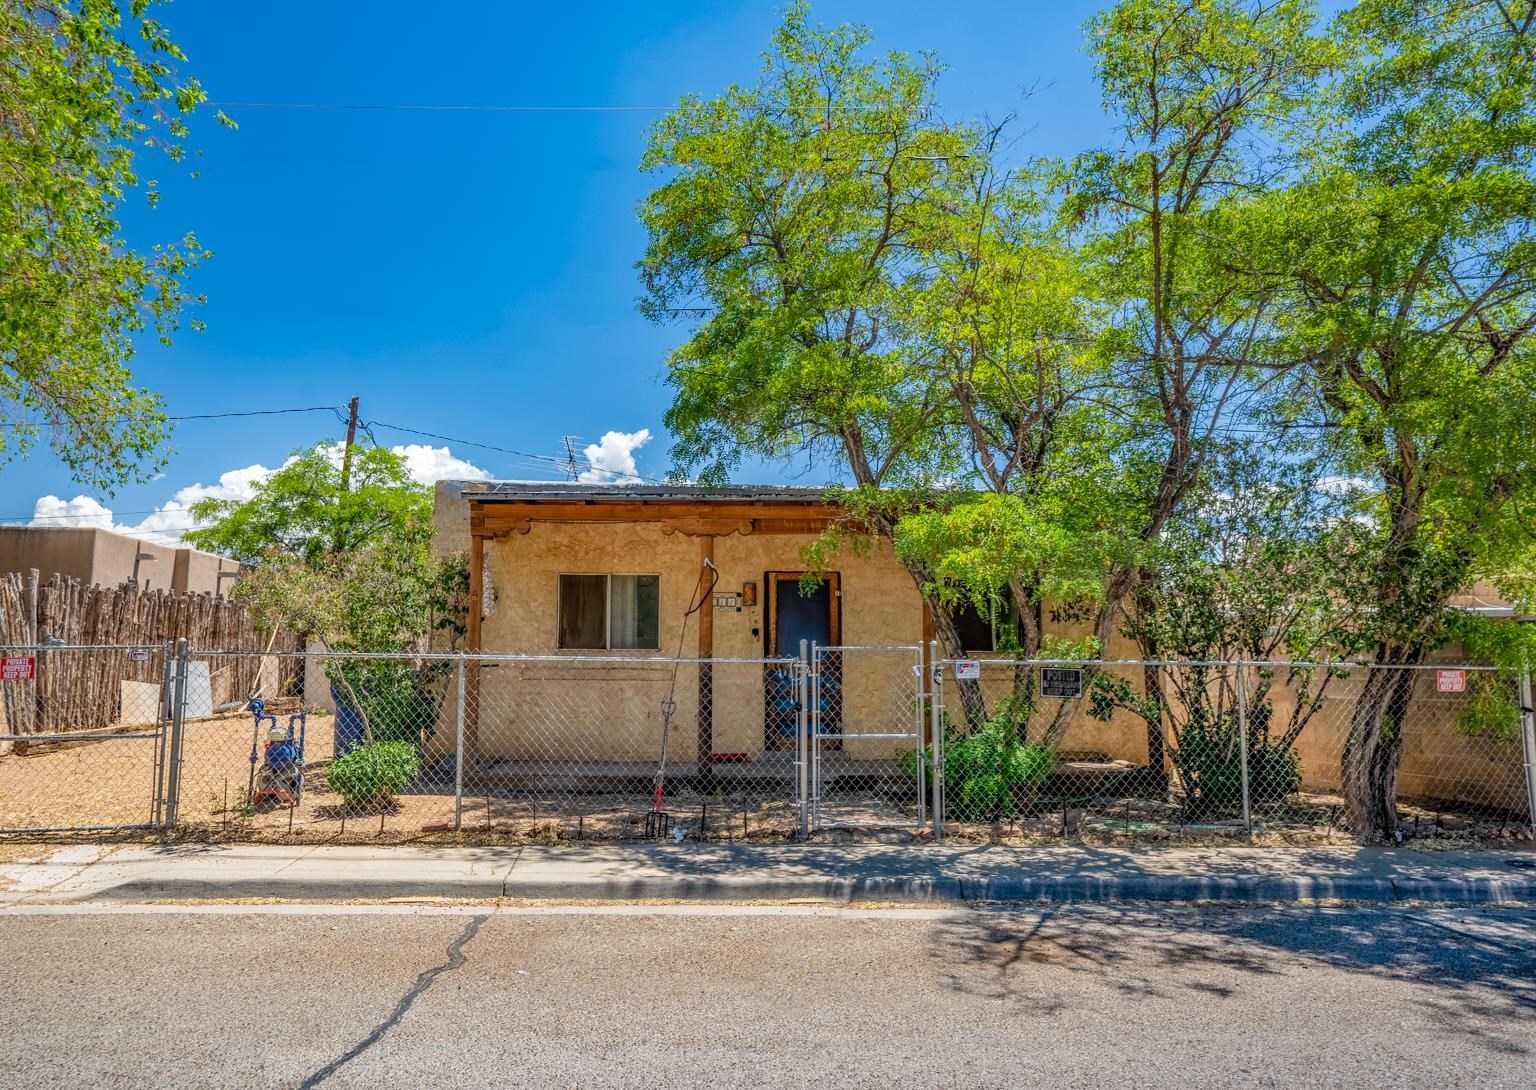 611 Jiron, Santa Fe, New Mexico 87505, 1 Bedroom Bedrooms, ,1 BathroomBathrooms,Residential,For Sale,611 Jiron,202201994